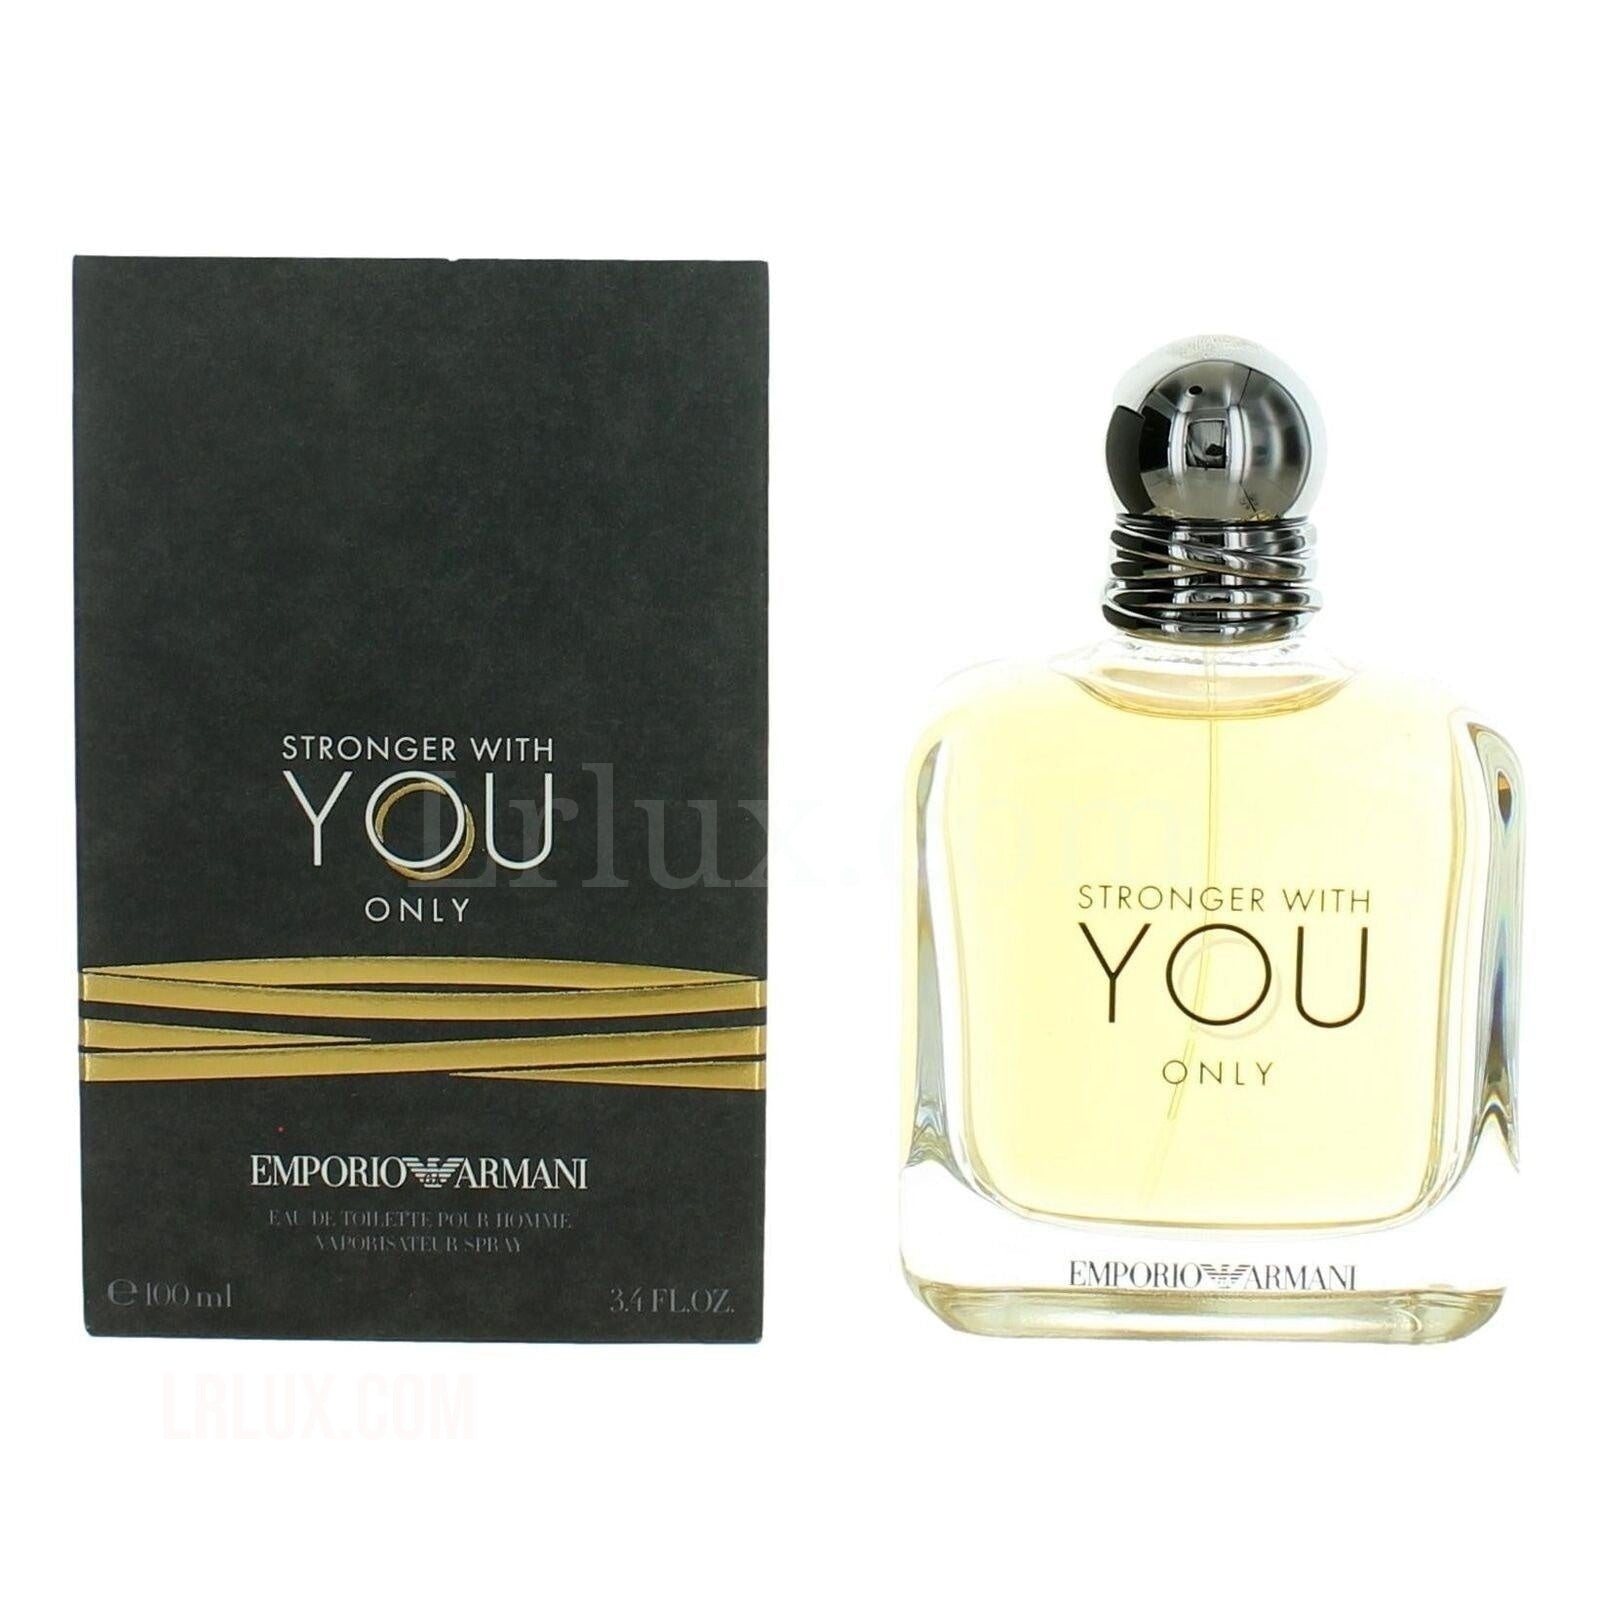 Stronger With You Only by Emporio Armani 3.4 oz EDT Spray for Men - Lrlux.com